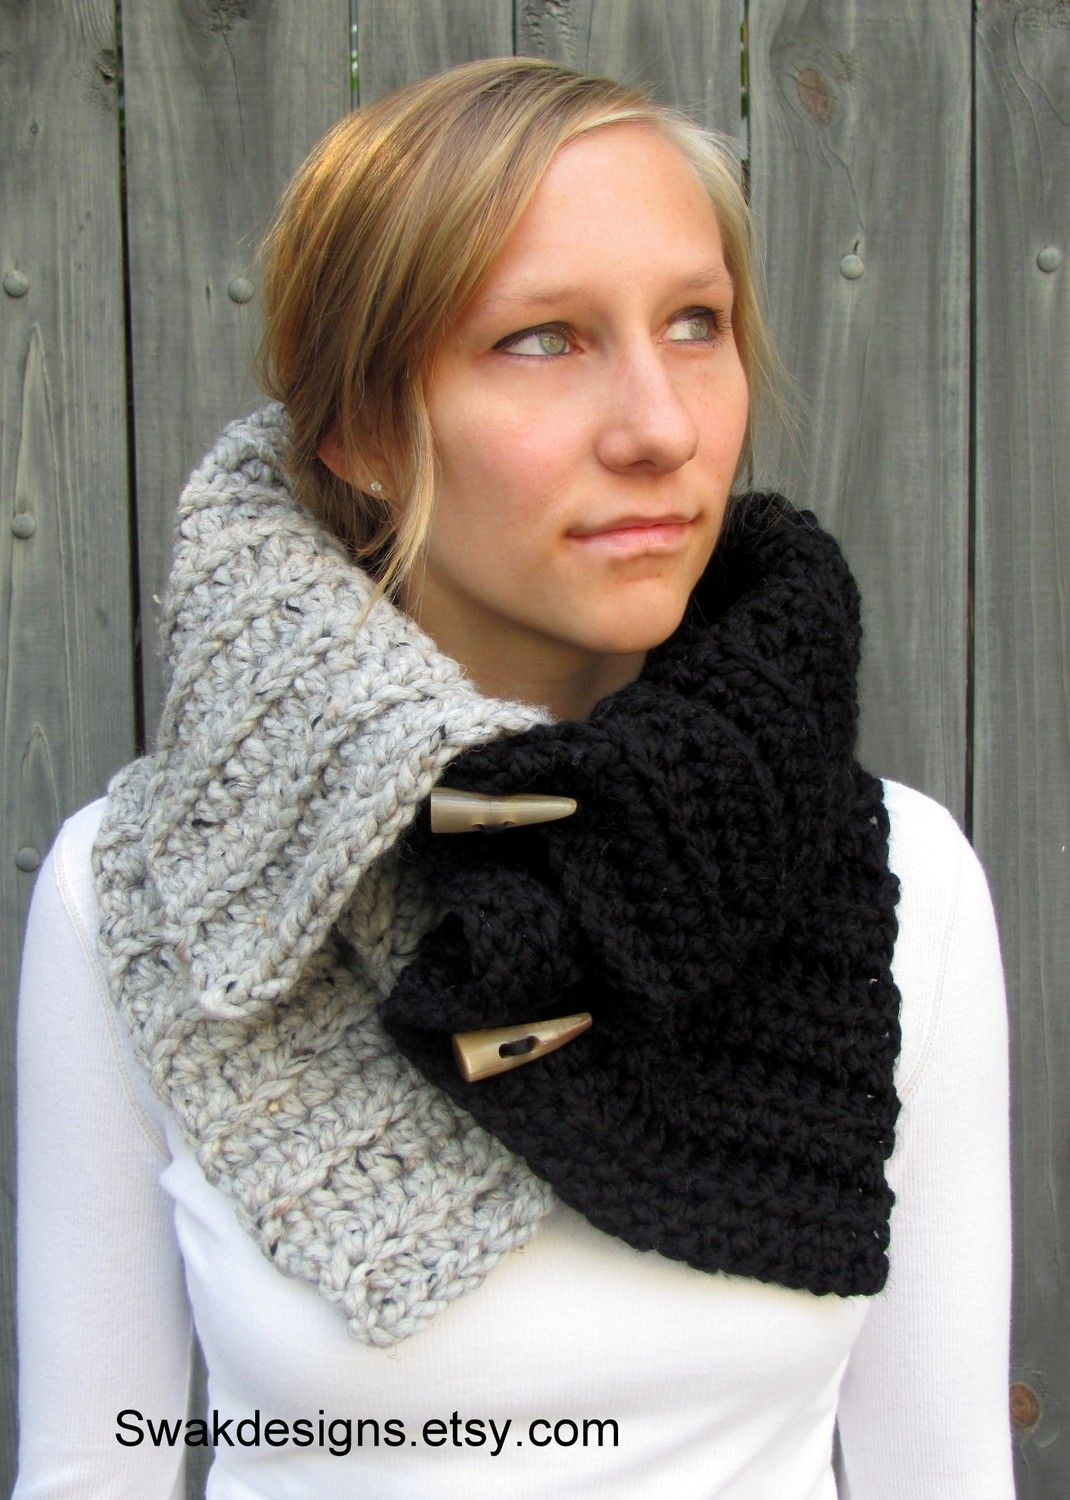 Snood Scarf Crochet Pattern Two Tone Snood Cowl Wrap With Hornshandmadechoose Your Colors